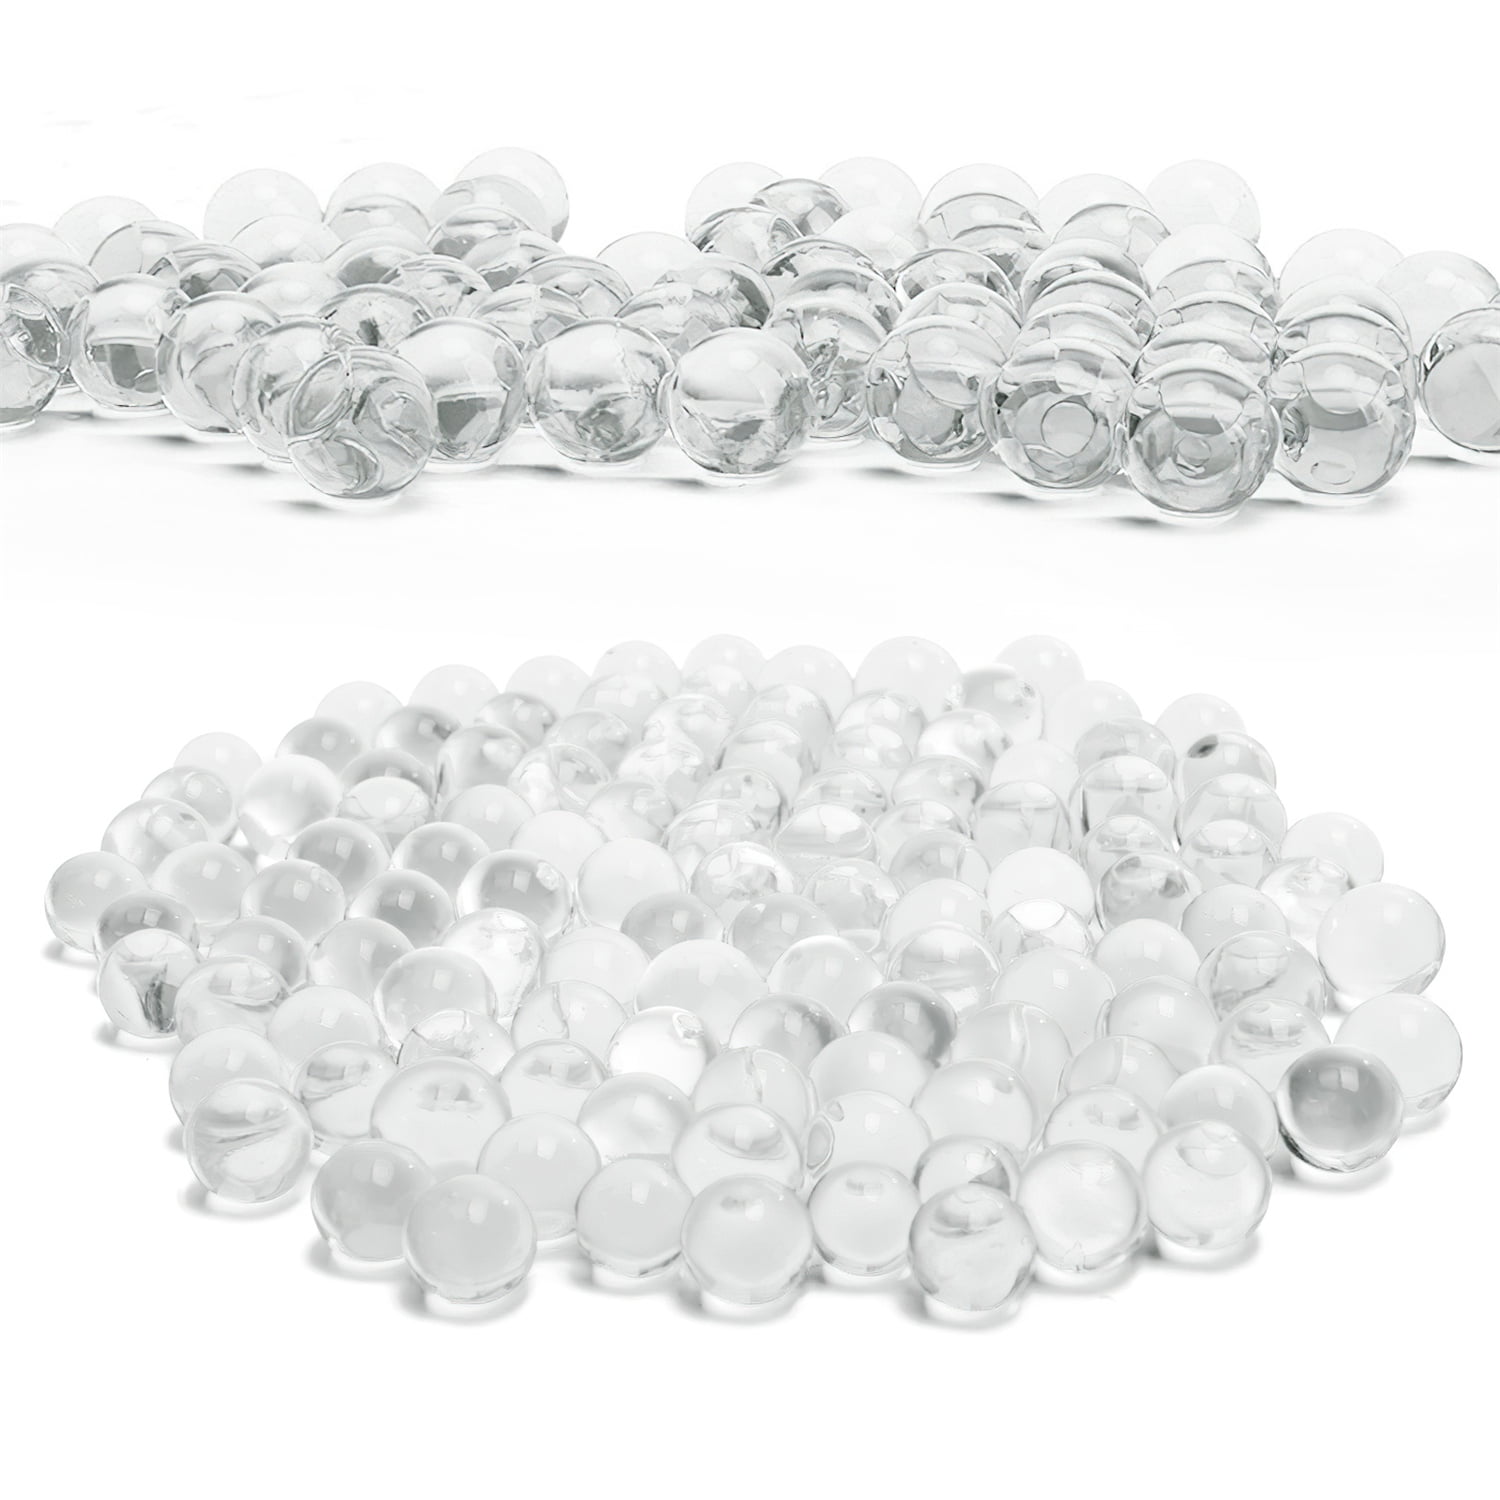 NIKOEO Clear Water Beads, 10000 Pcs Clear Water Gel Jelly Beads Vase Filler  for Floating Candle Making, Wedding Centerpiece, Festive Floral Decoration